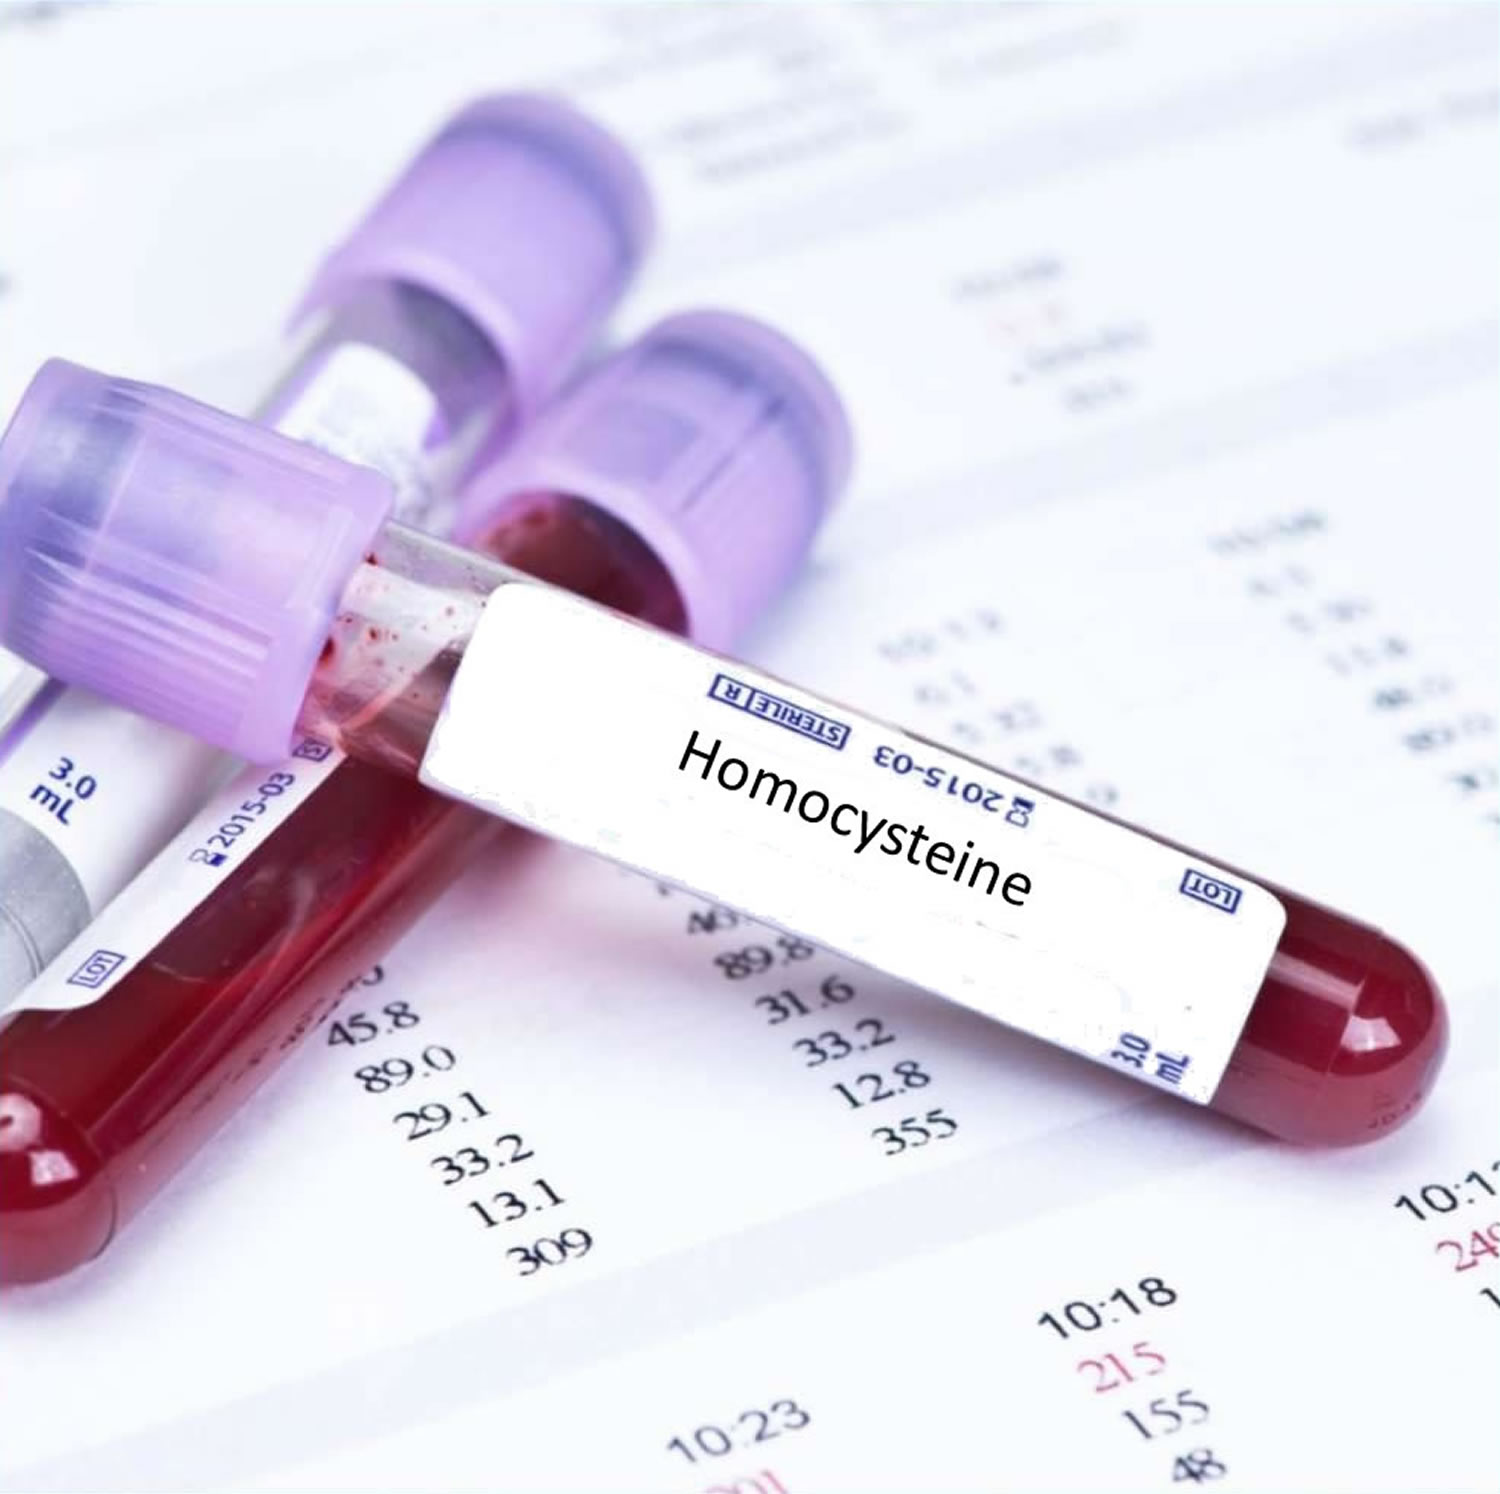 Methylation and Homocysteine, the Importance of Knowing Where You Stand